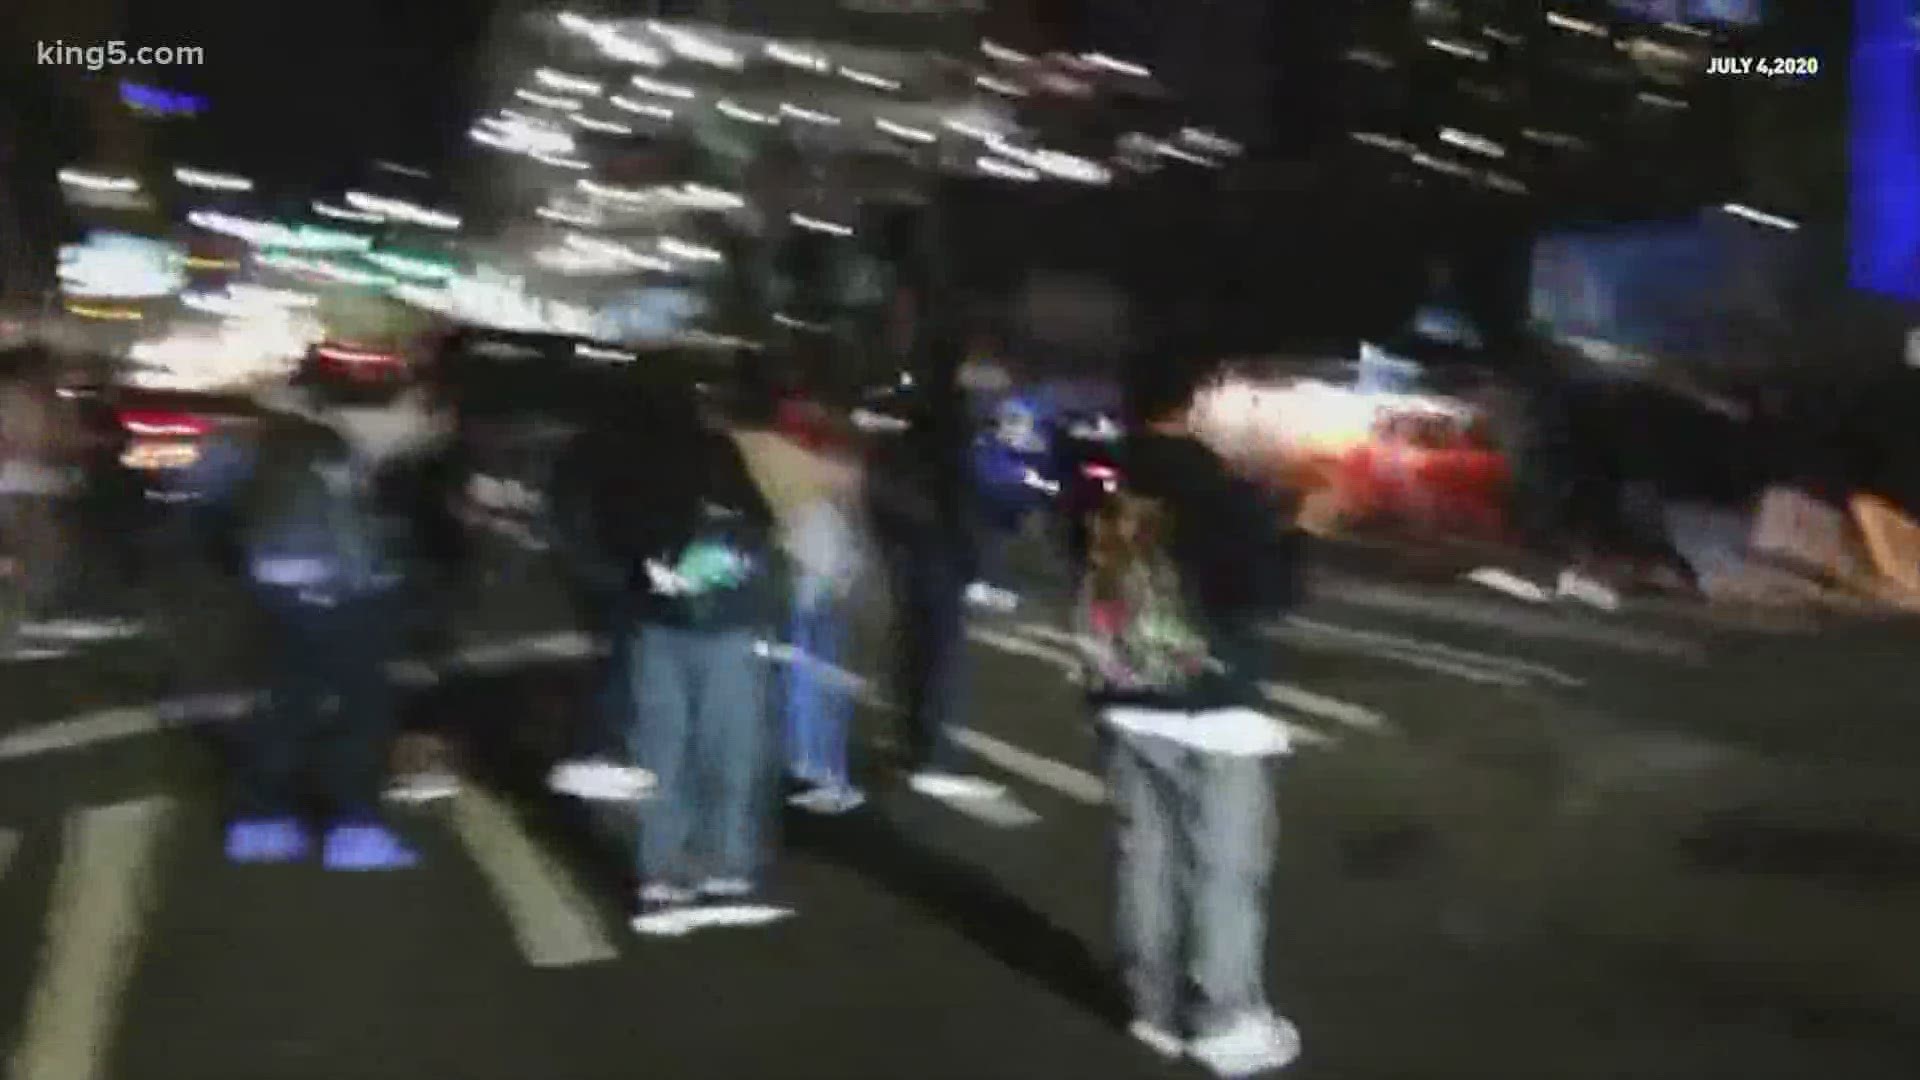 Video shows a car driving through a crowd of protesters on Capitol Hill after midnight on July 4. The incident is unrelated to a deadly crash on I-5.